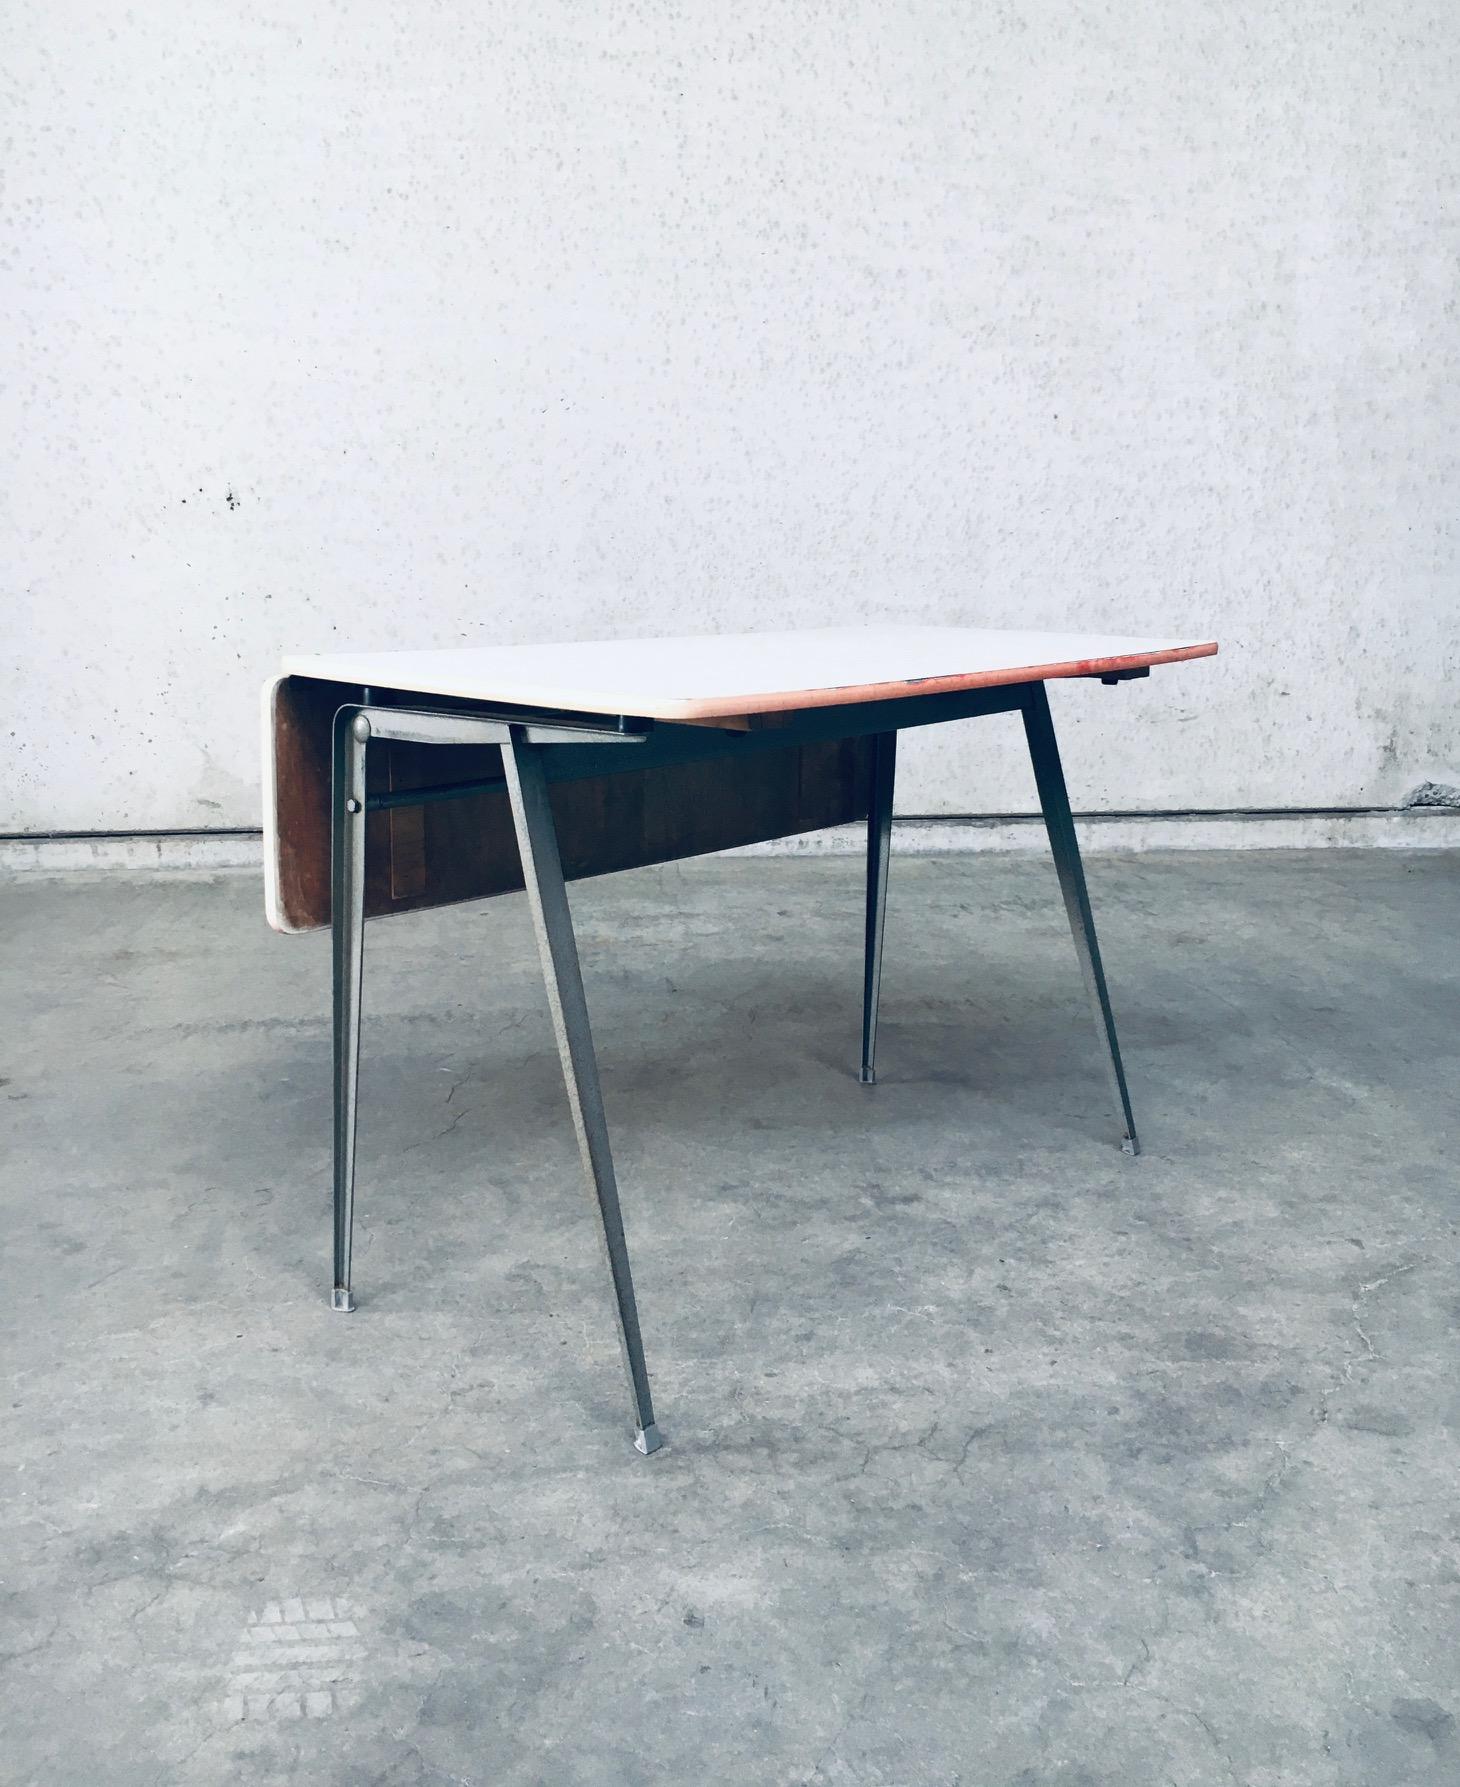 Vintage Midcentury Dutch Industrial Design Desk by Wim Rietveld and Friso Kramer for Ahrend De Cirkel. Made in the Netherlands, late 1950's, early 1960's. A RARE and hard to find design desk. Probably used in a school, hence the signs on the